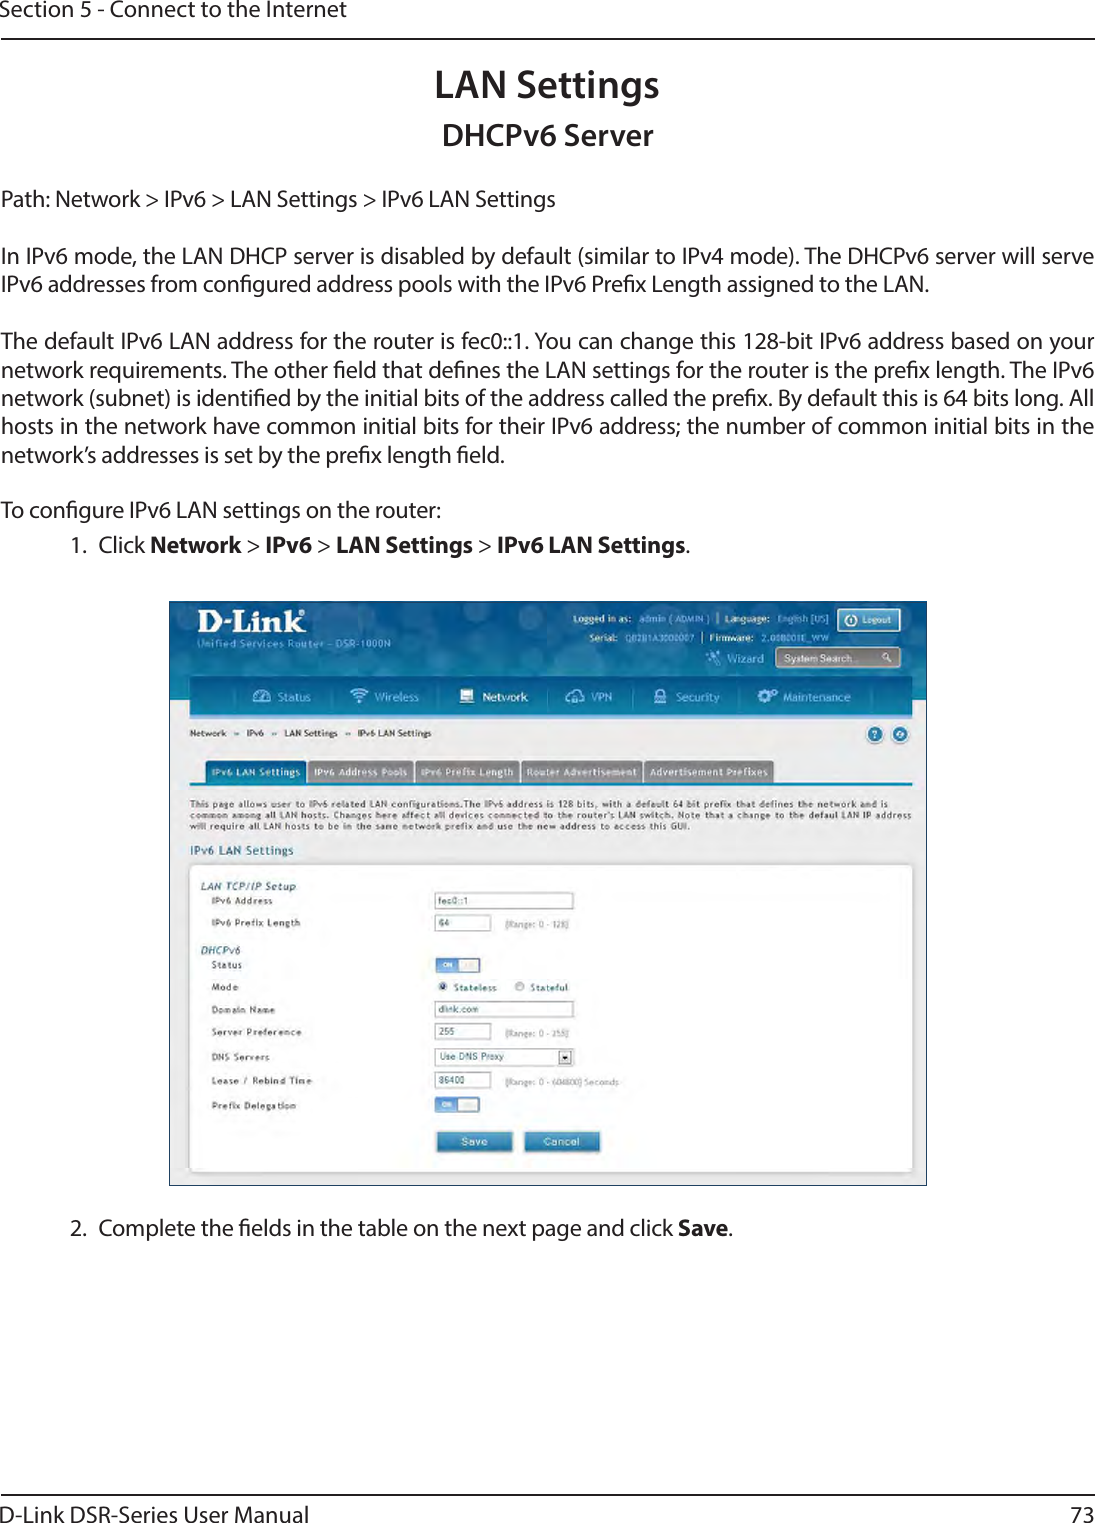 D-Link DSR-Series User Manual 73Section 5 - Connect to the InternetLAN SettingsPath: Network &gt; IPv6 &gt; LAN Settings &gt; IPv6 LAN SettingsIn IPv6 mode, the LAN DHCP server is disabled by default (similar to IPv4 mode). The DHCPv6 server will serve IPv6 addresses from congured address pools with the IPv6 Prex Length assigned to the LAN.The default IPv6 LAN address for the router is fec0::1. You can change this 128-bit IPv6 address based on your network requirements. The other eld that denes the LAN settings for the router is the prex length. The IPv6 network (subnet) is identied by the initial bits of the address called the prex. By default this is 64 bits long. All hosts in the network have common initial bits for their IPv6 address; the number of common initial bits in the network’s addresses is set by the prex length eld.To congure IPv6 LAN settings on the router:1. Click Network &gt; IPv6 &gt; LAN Settings &gt; IPv6 LAN Settings.2.  Complete the elds in the table on the next page and click Save.DHCPv6 Server